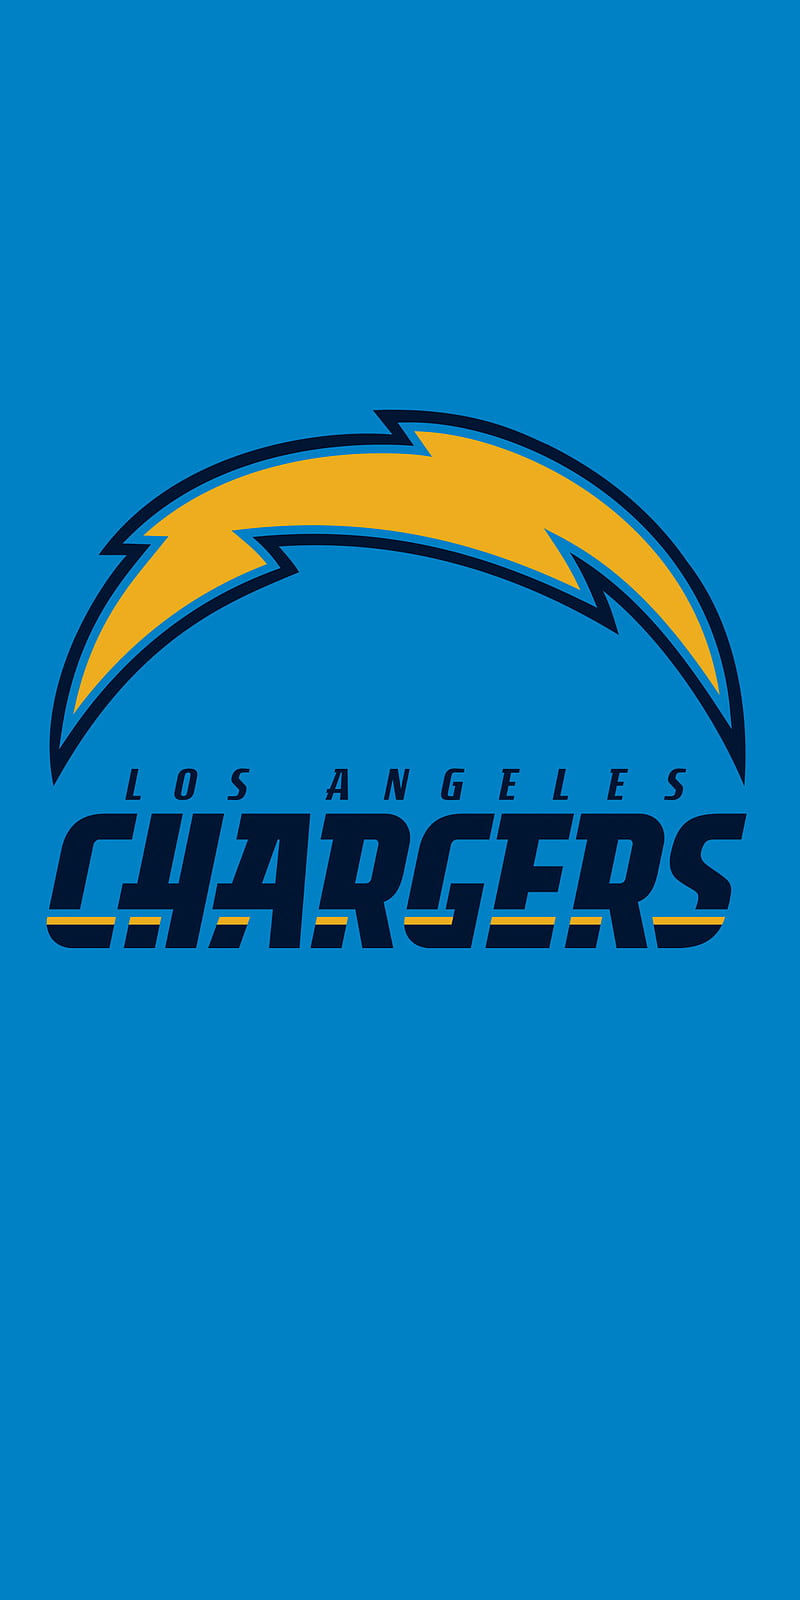 Background Chargers Wallpaper Discover more American Chargers Football Los  Angeles Metropol  Los angeles chargers Los angeles chargers logo La  chargers logo